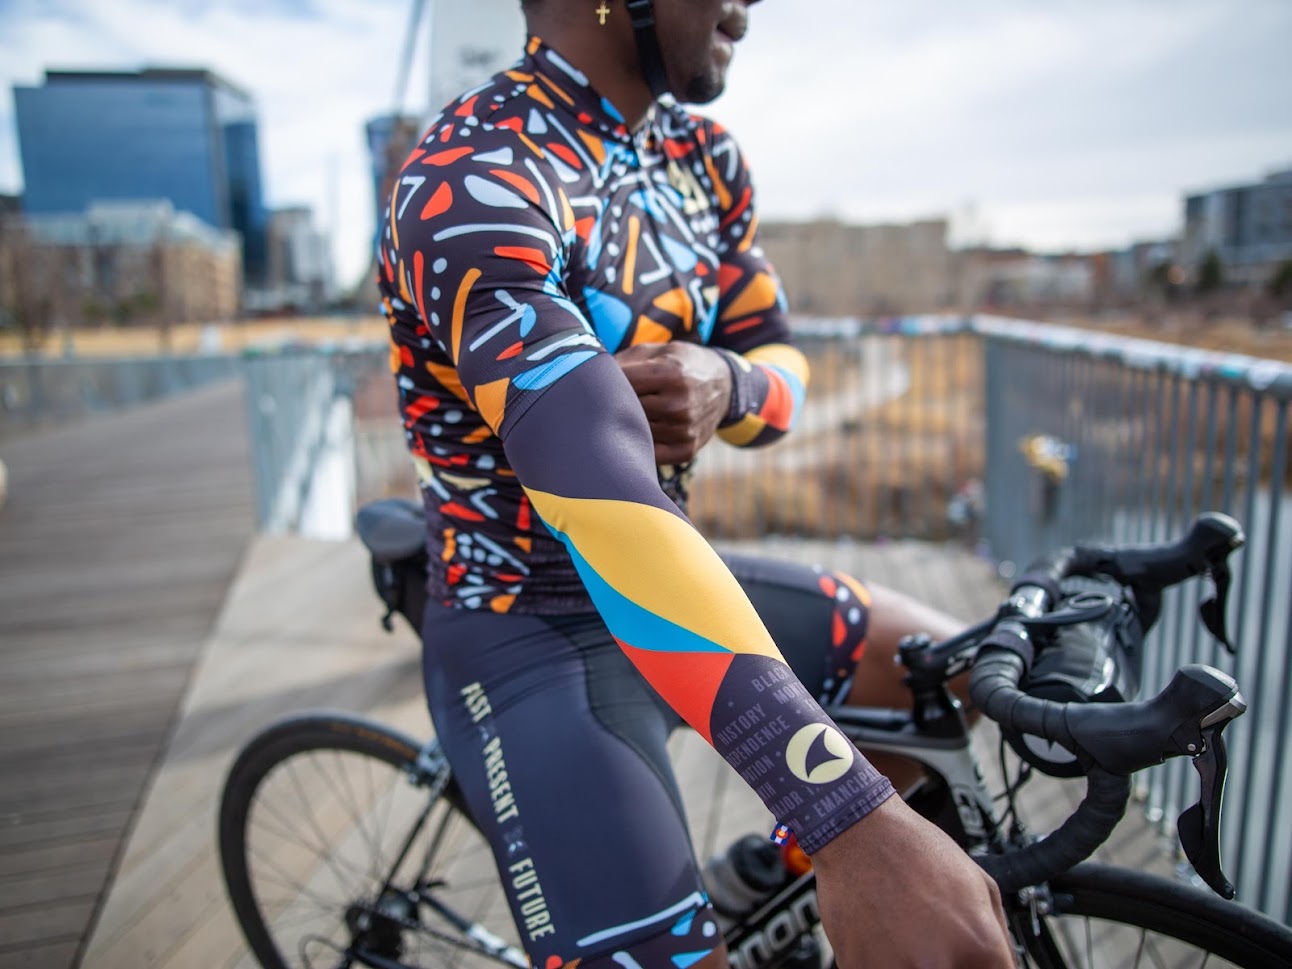 Summer Sleeves - Indy freelance x Major Taylor Iron Riders - A cycling clothing celebration of Black History Month - Past, Present, Future